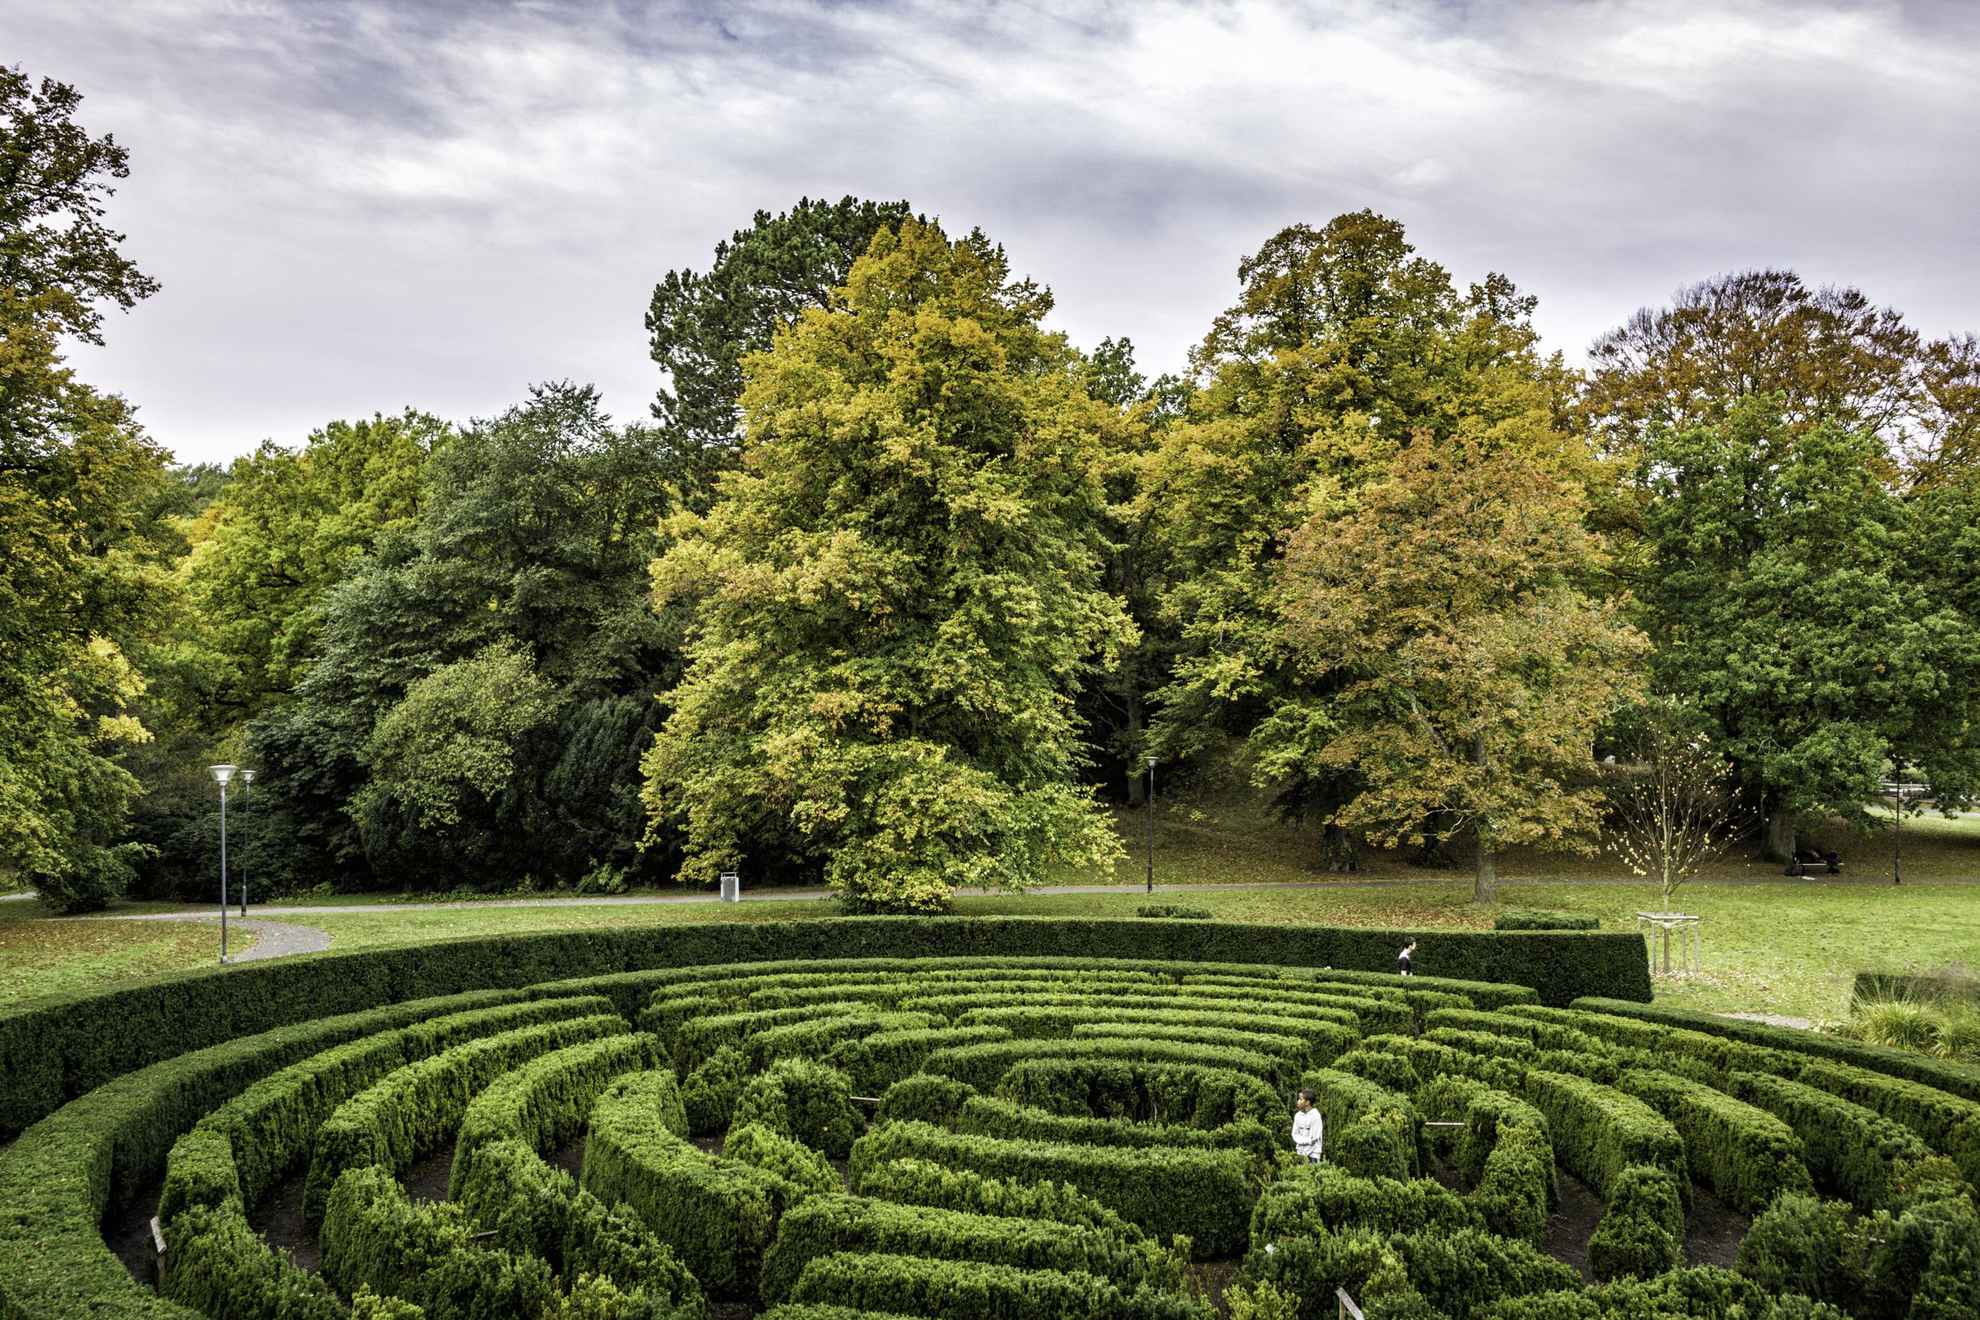 A hedge maze in a park during the summer.